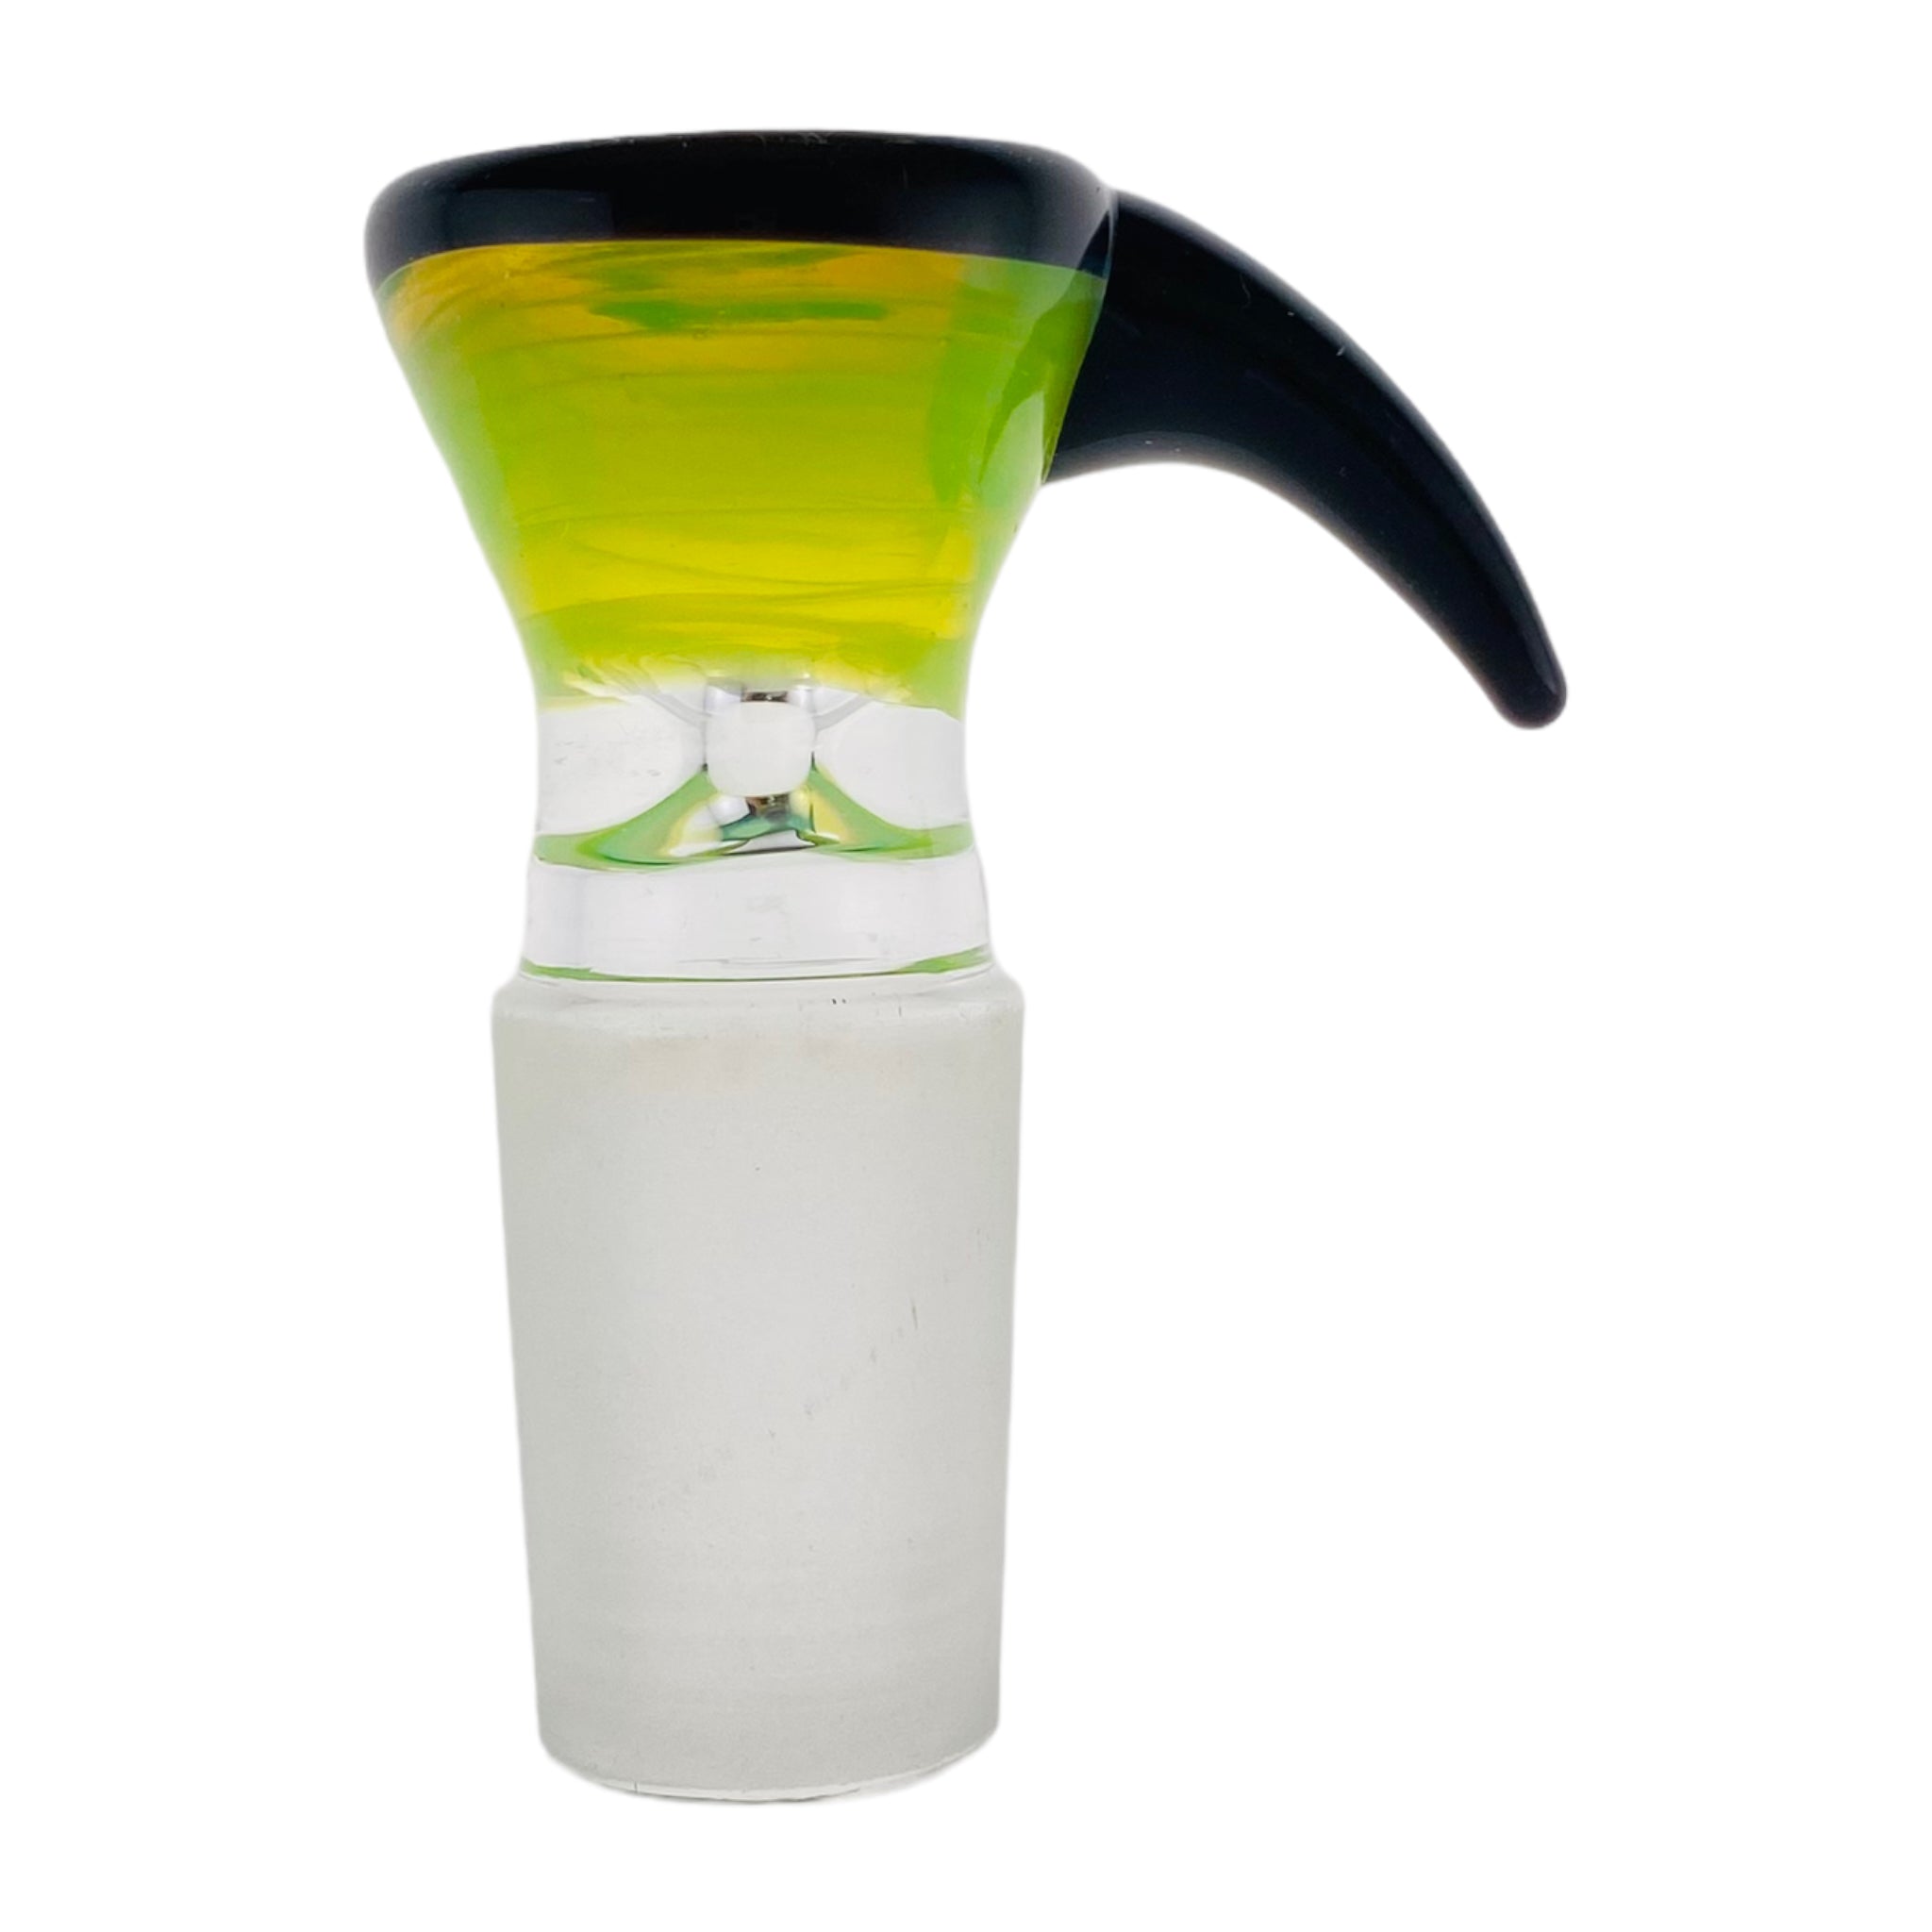 18mm Flower Bowl - Green Funnel With Black Handle Bong Bowl Piece